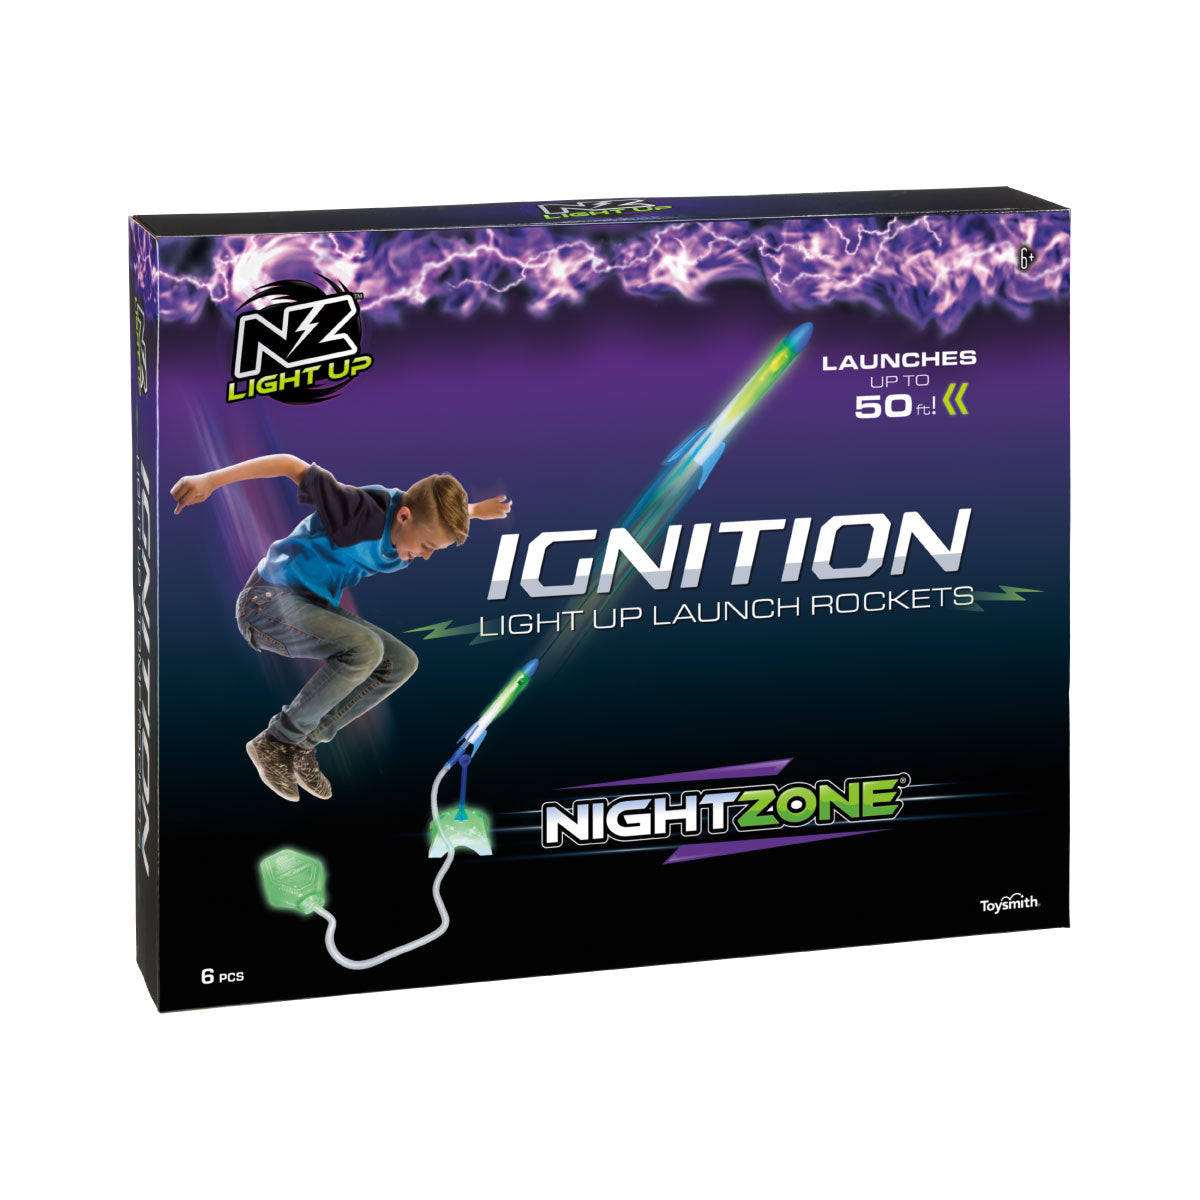 Nightzone Ignition Light Up Launch Rockets from Toysmith